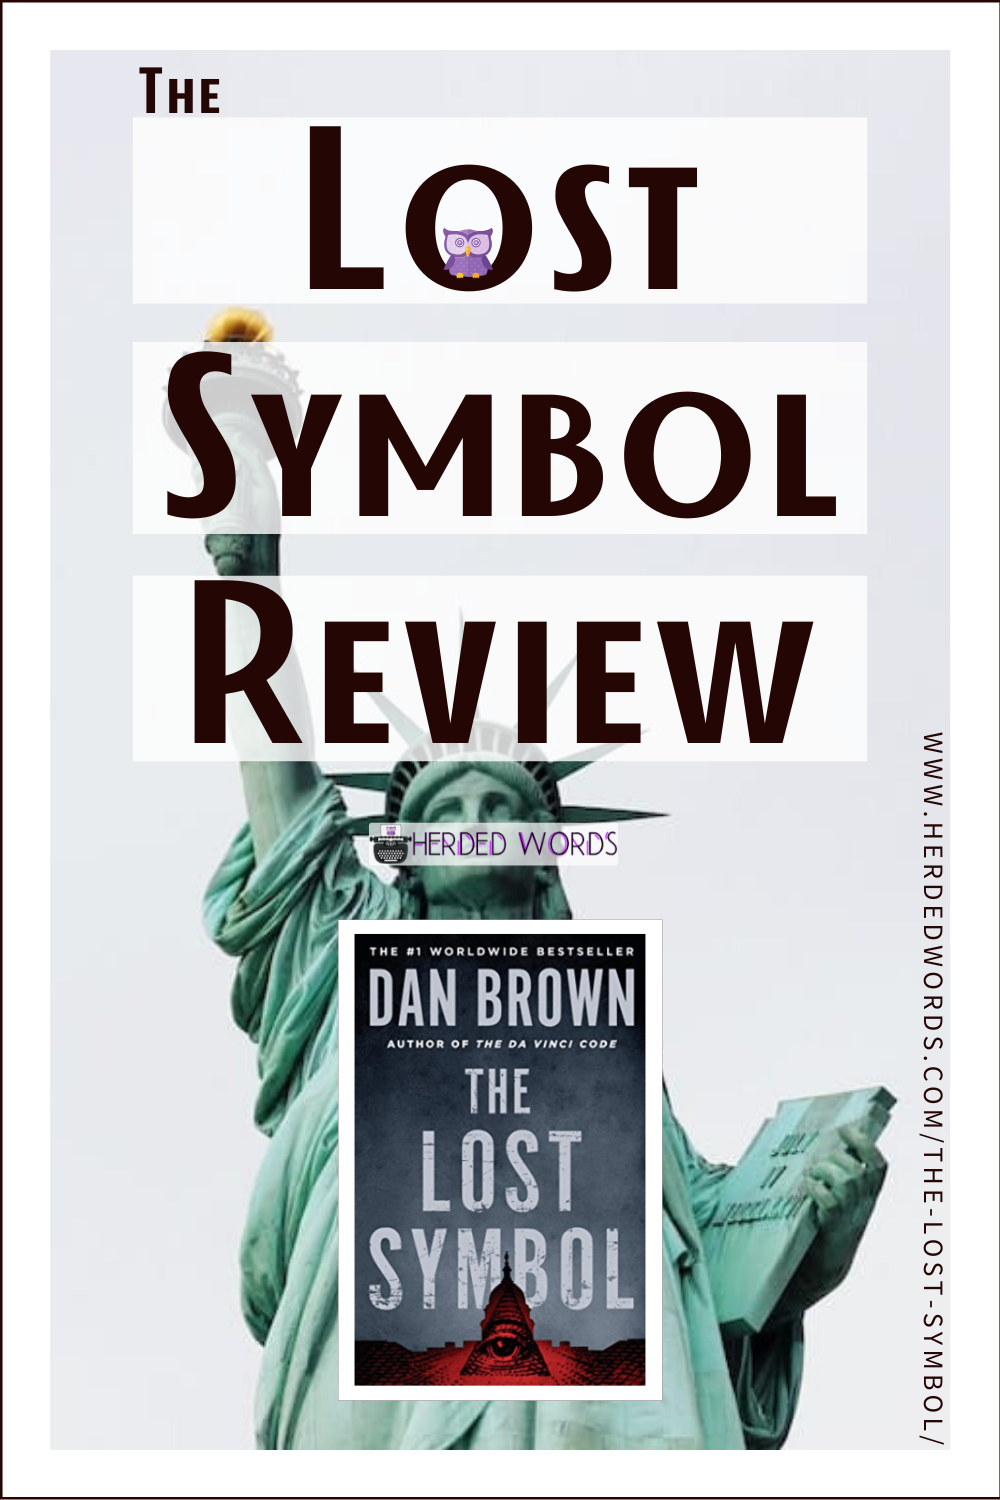 Pin This: Book Review & Analysis of THE LOST SYMBOL